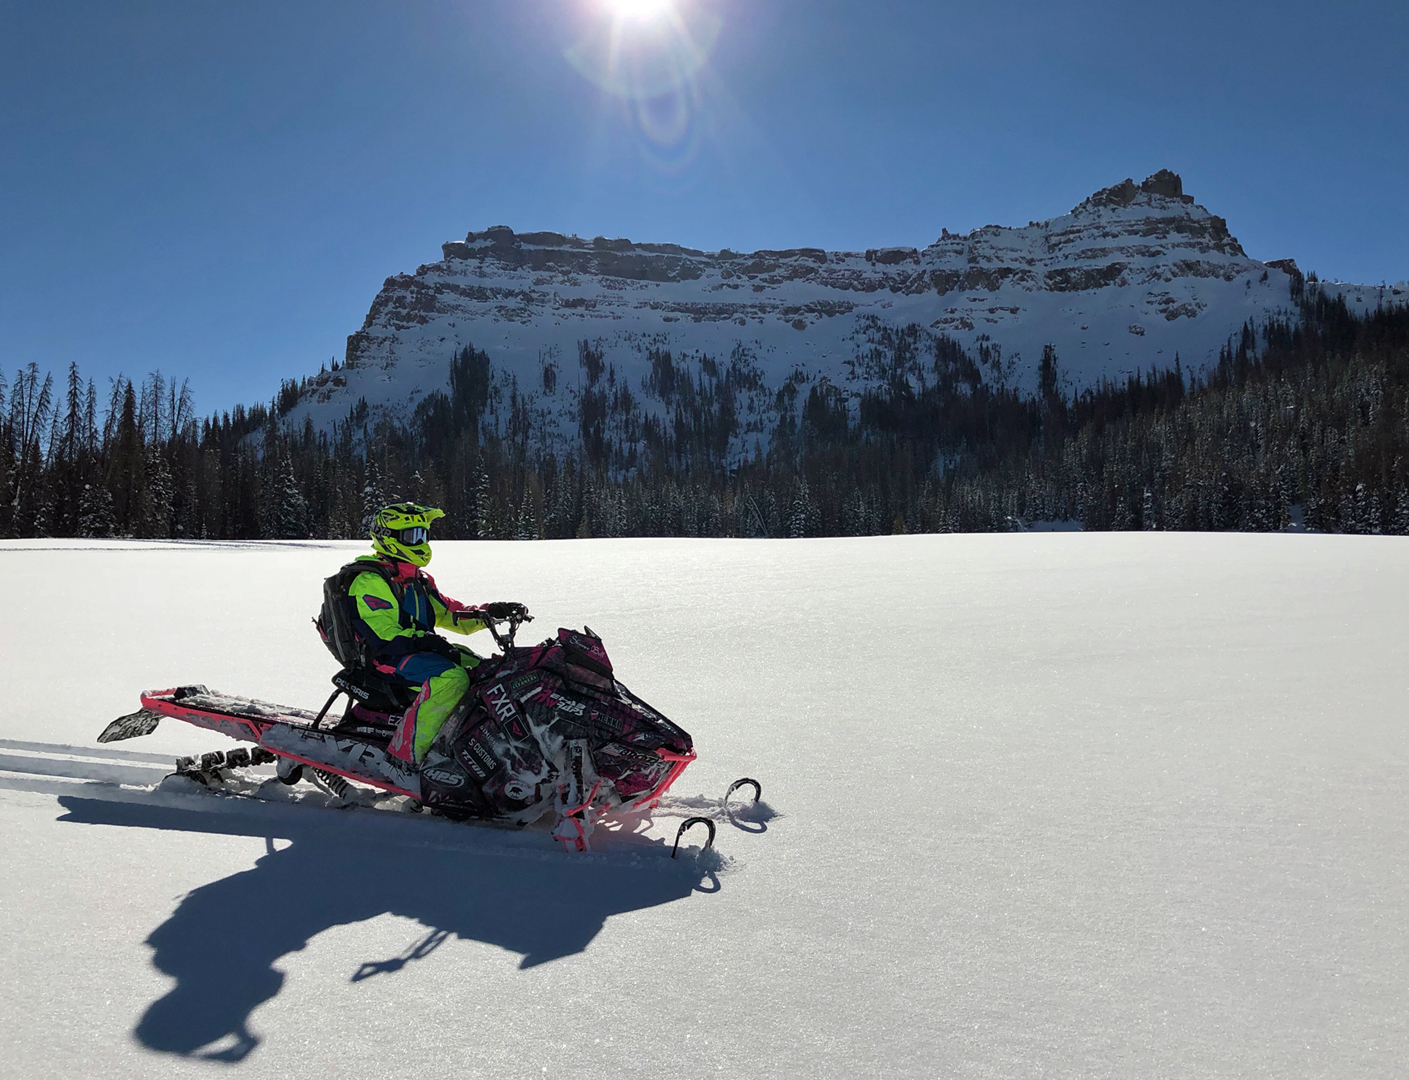 Guests of Brooks Lake Lodge & Spa can enjoy a variety of included winter activities such as snowmobiling around the nearly two million acres of snowy and scenic terrain.